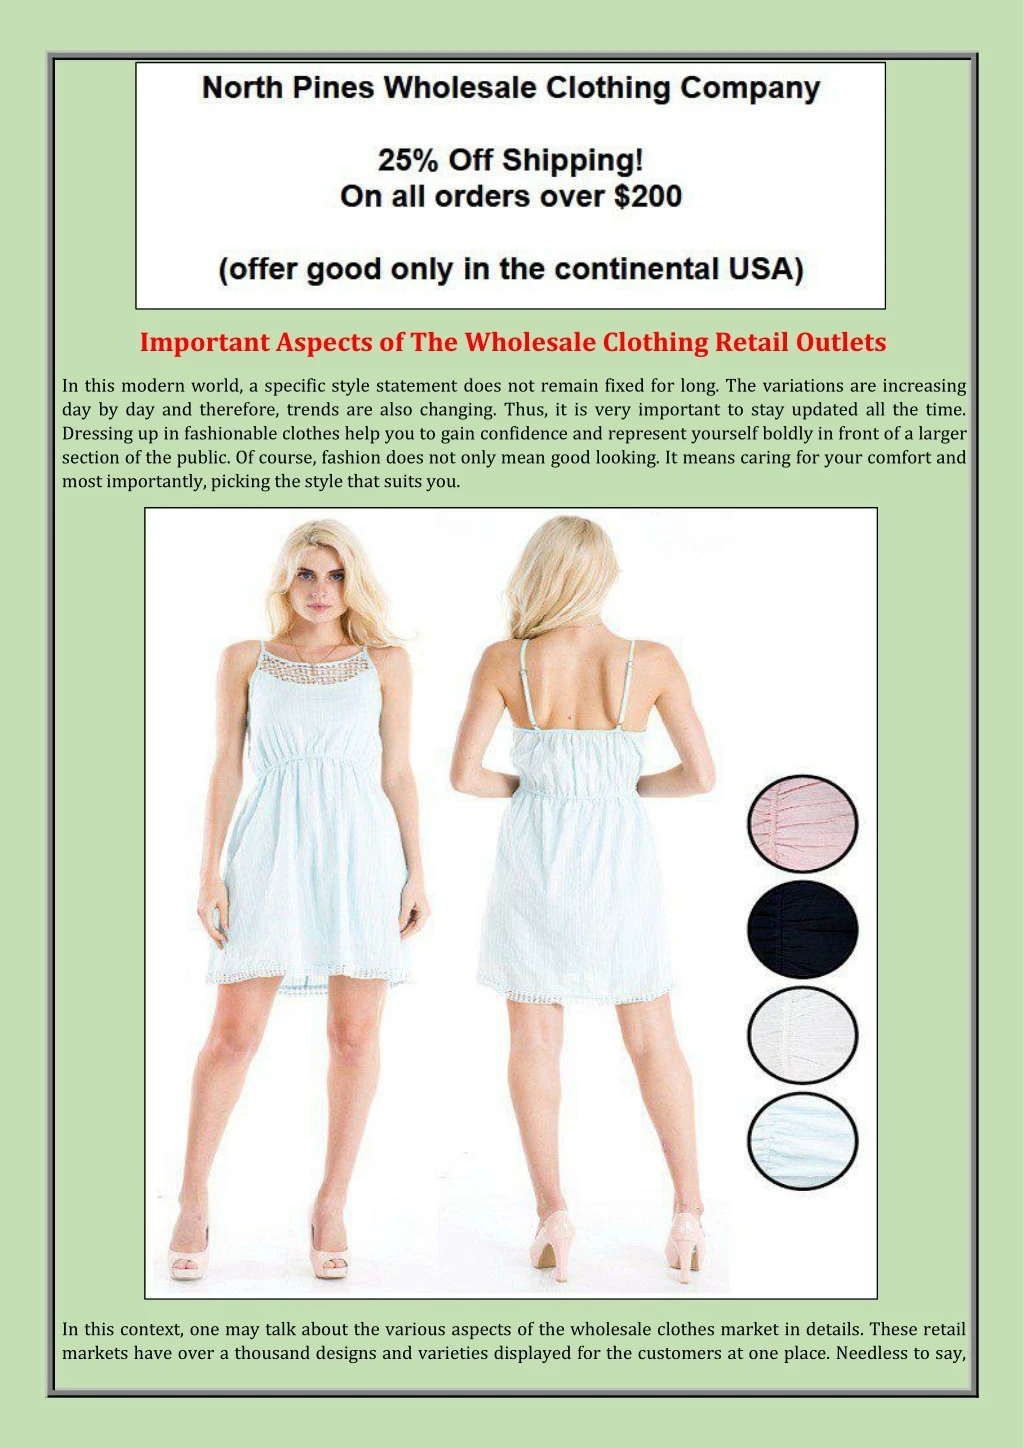 important aspects of the wholesale clothing